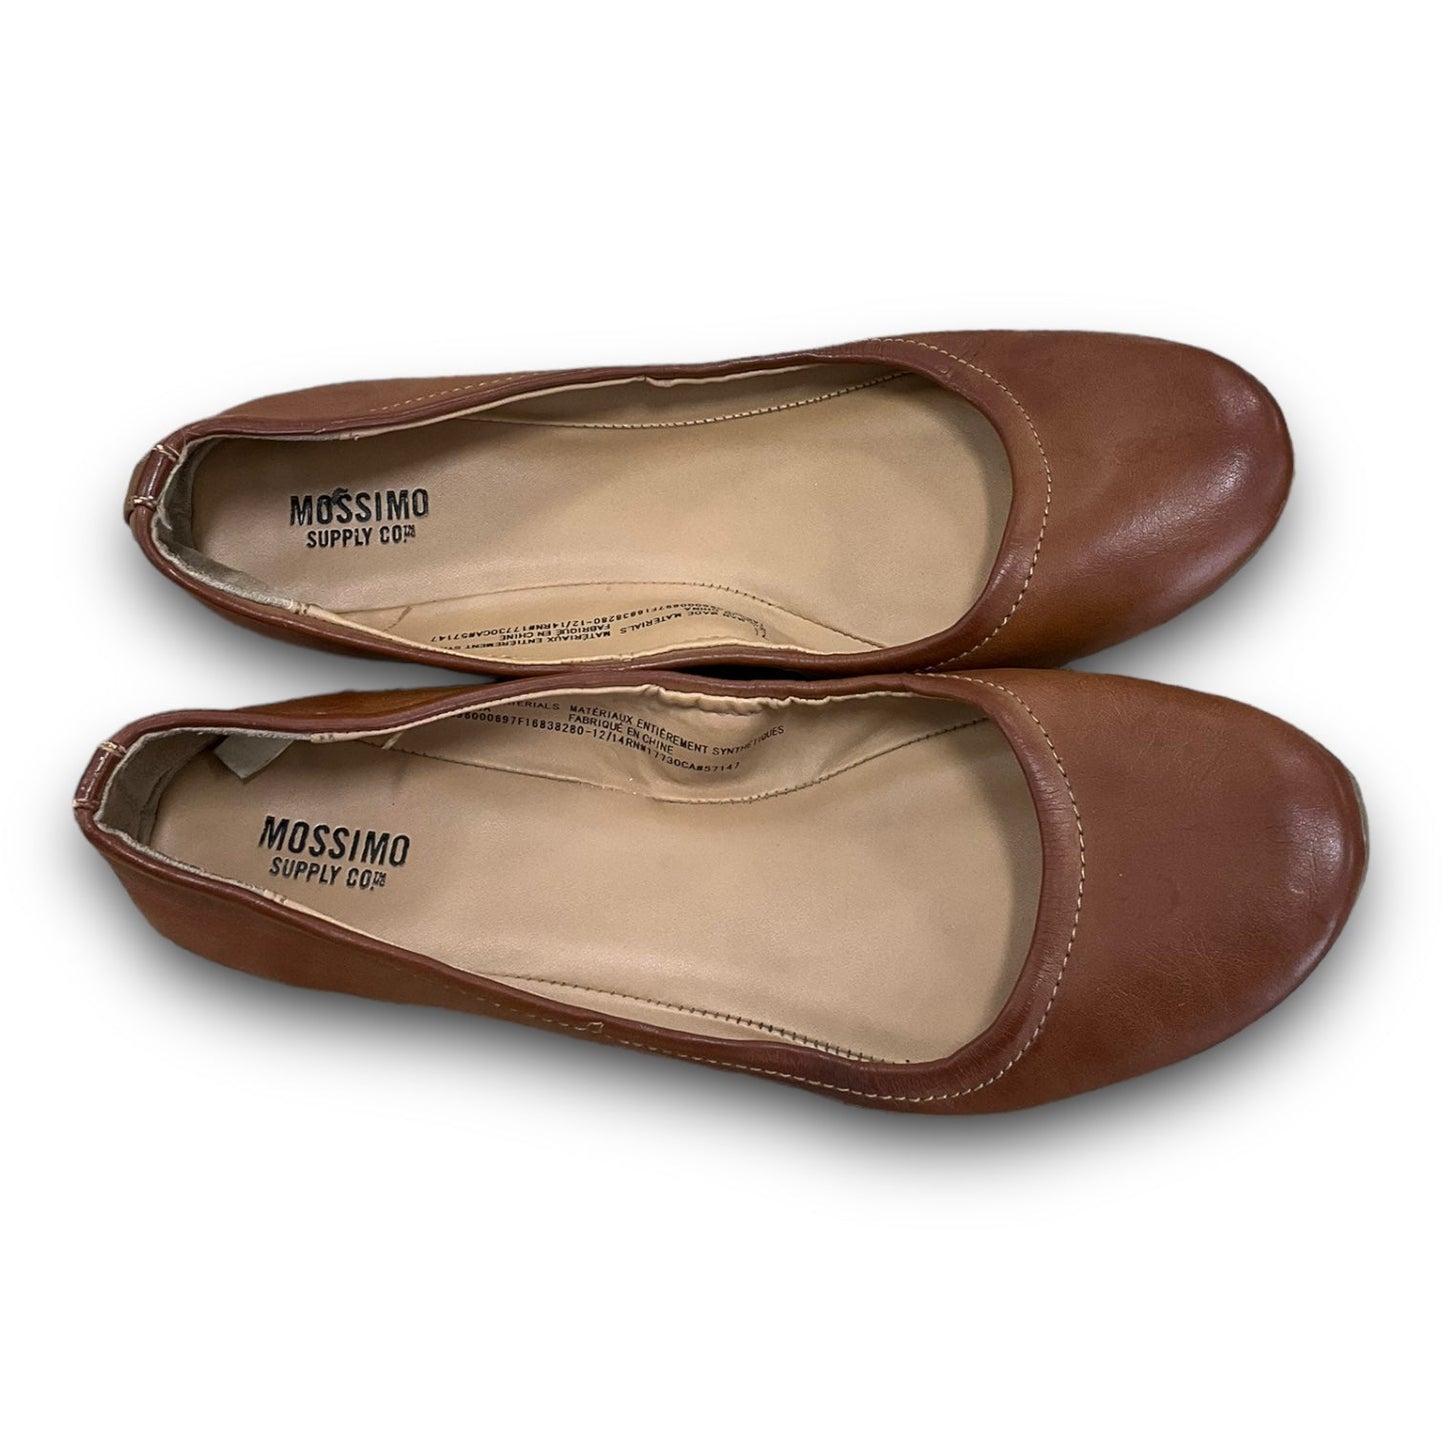 Brown Shoes Flats Mossimo, Size 7.5